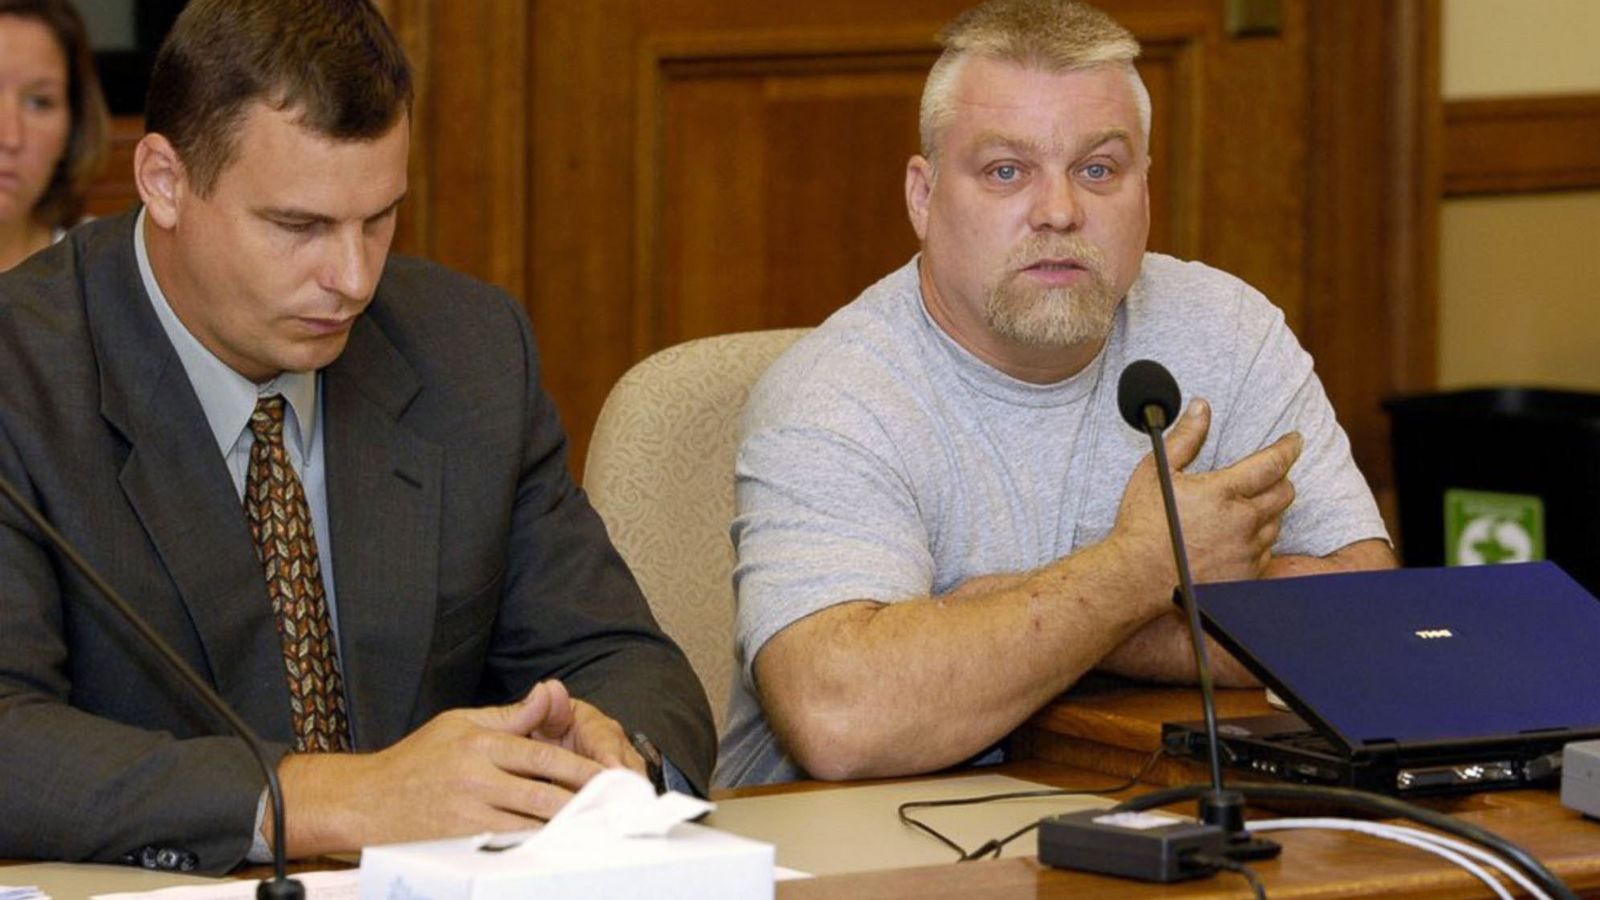 White House Responds to Petition for Steven Avery of 'Making a